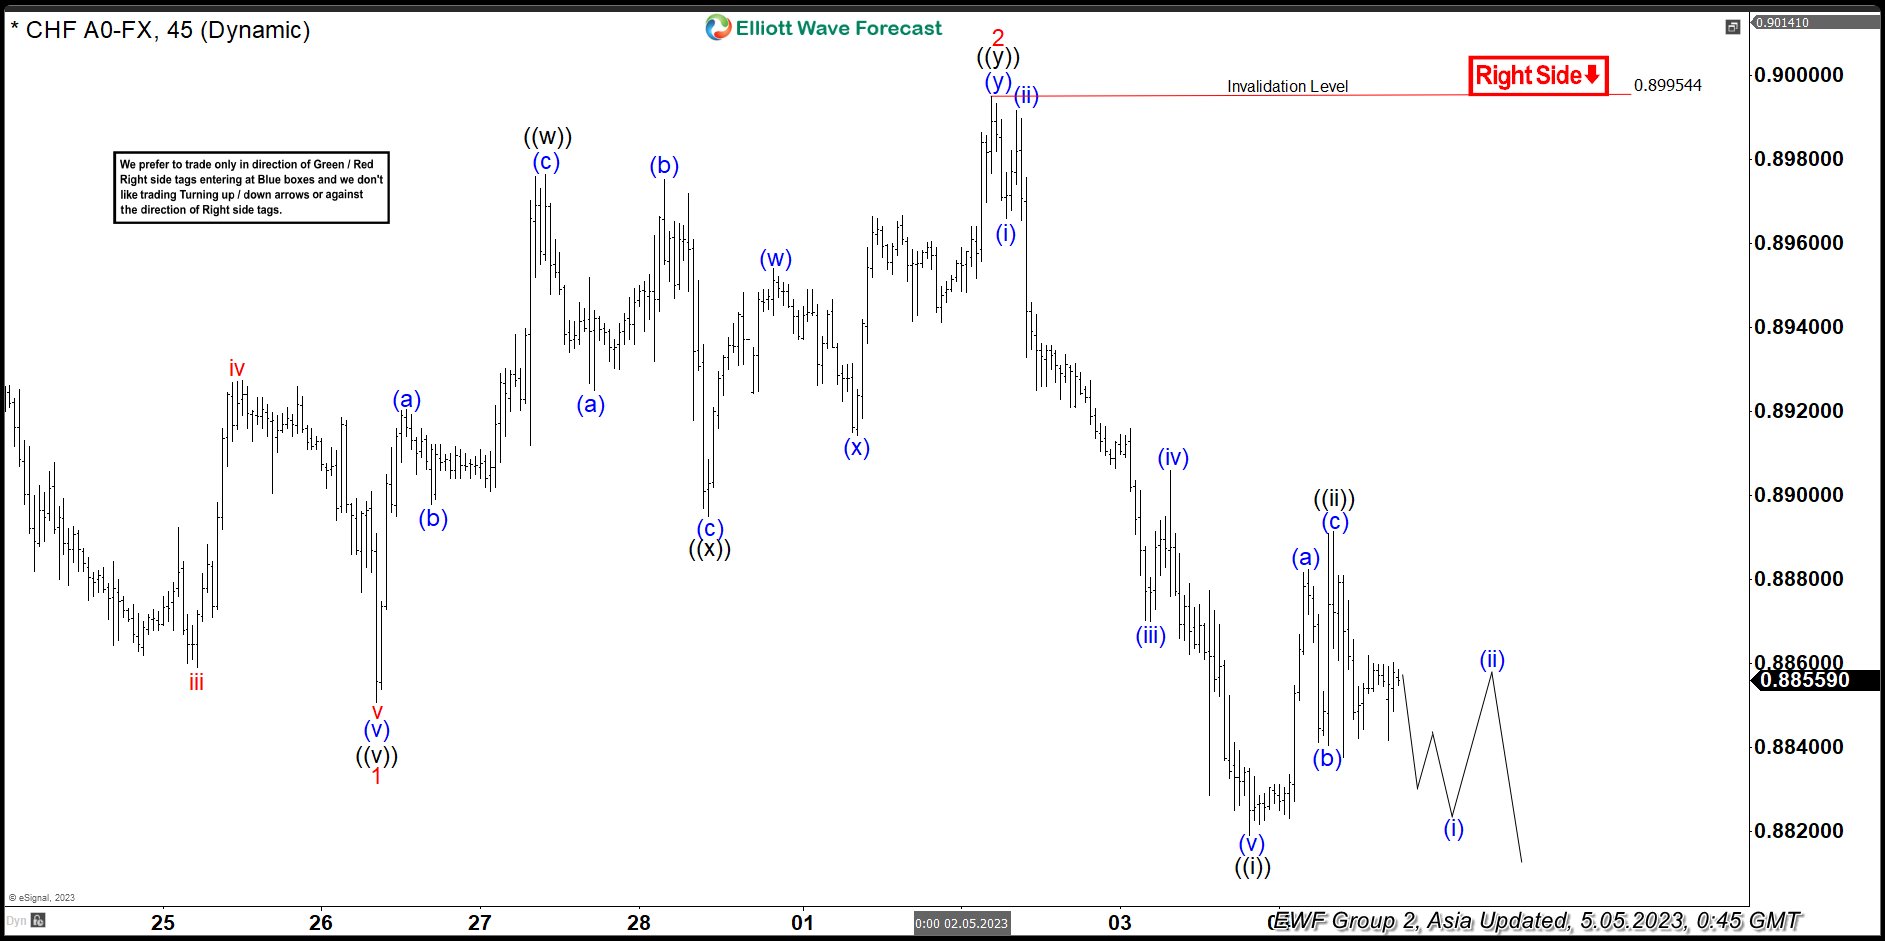 Elliott Wave Forecast: $USDCHF Rally Should Fail for More Downside